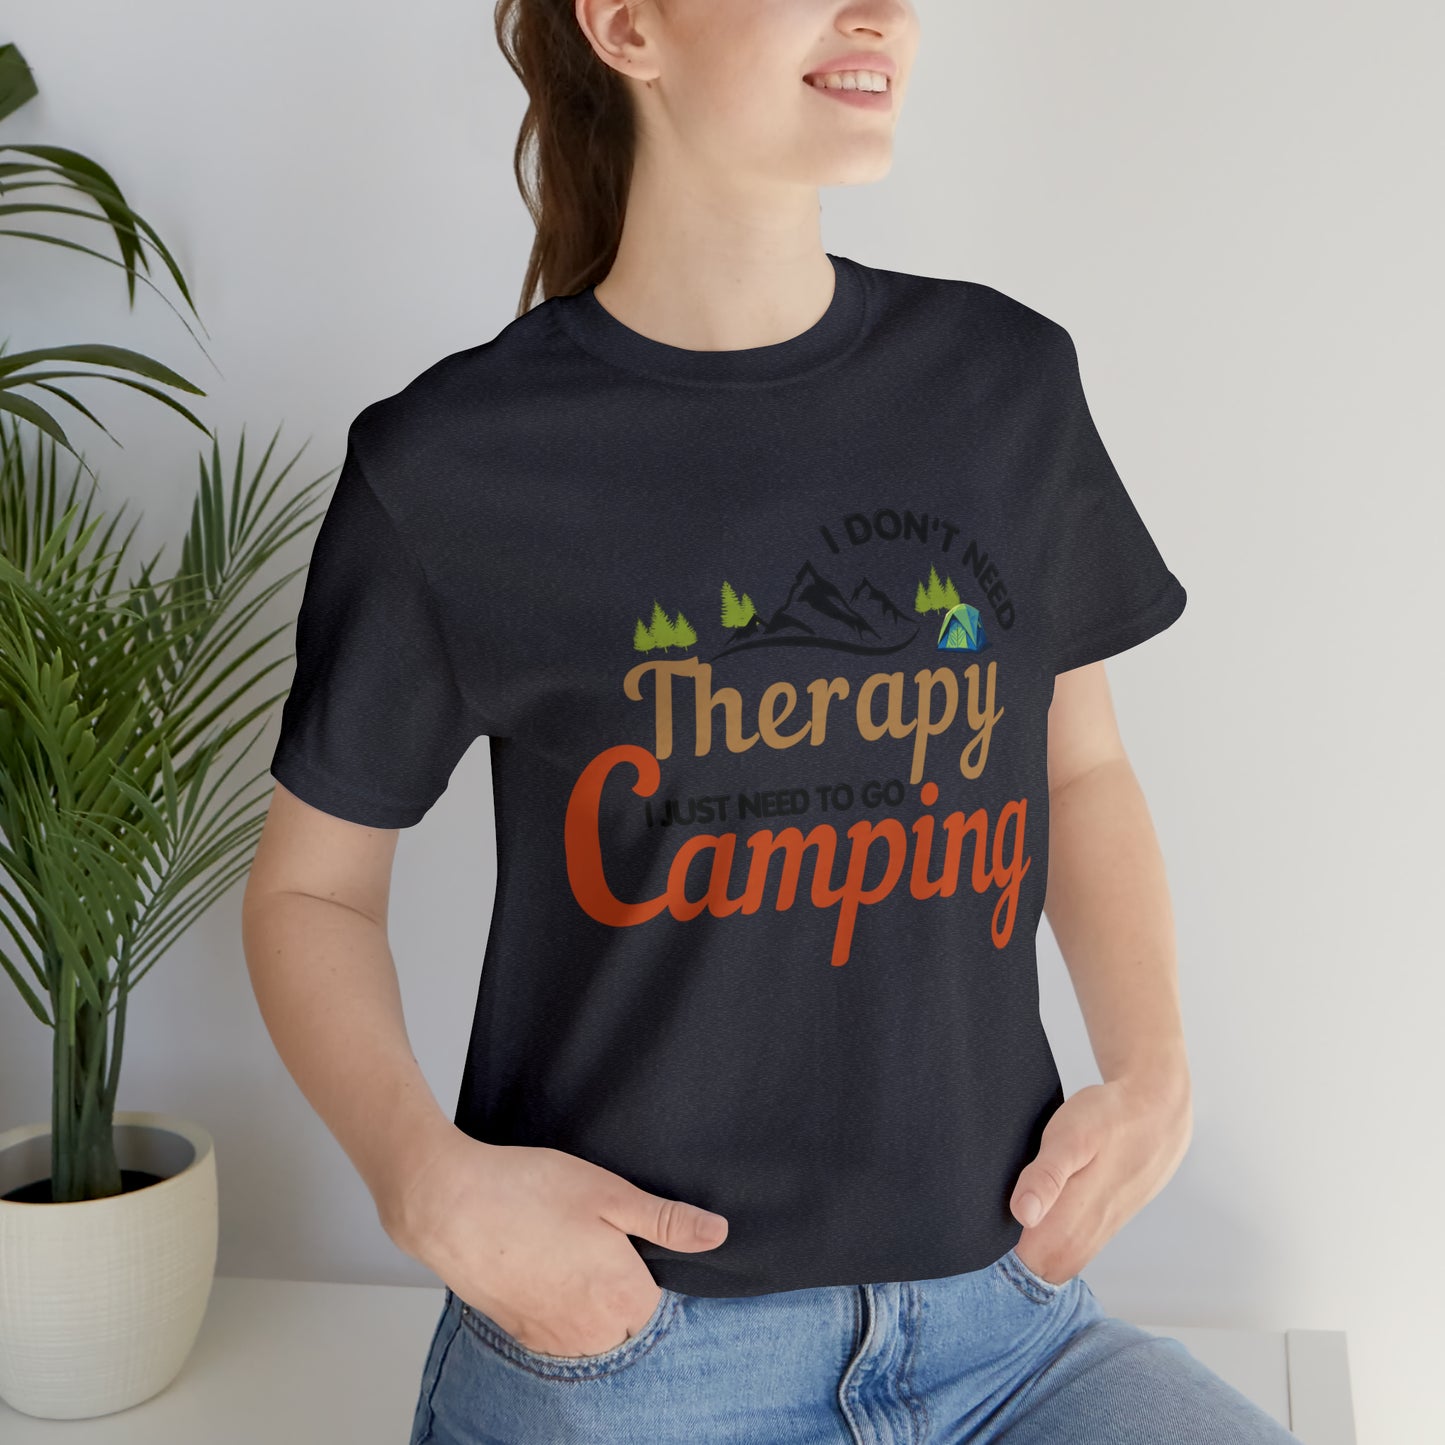 I don't need therapy I just need to go camping, camping shirt, dad shirt, dad gift, gift for outdoor lover, fishing gift nature lover shirt